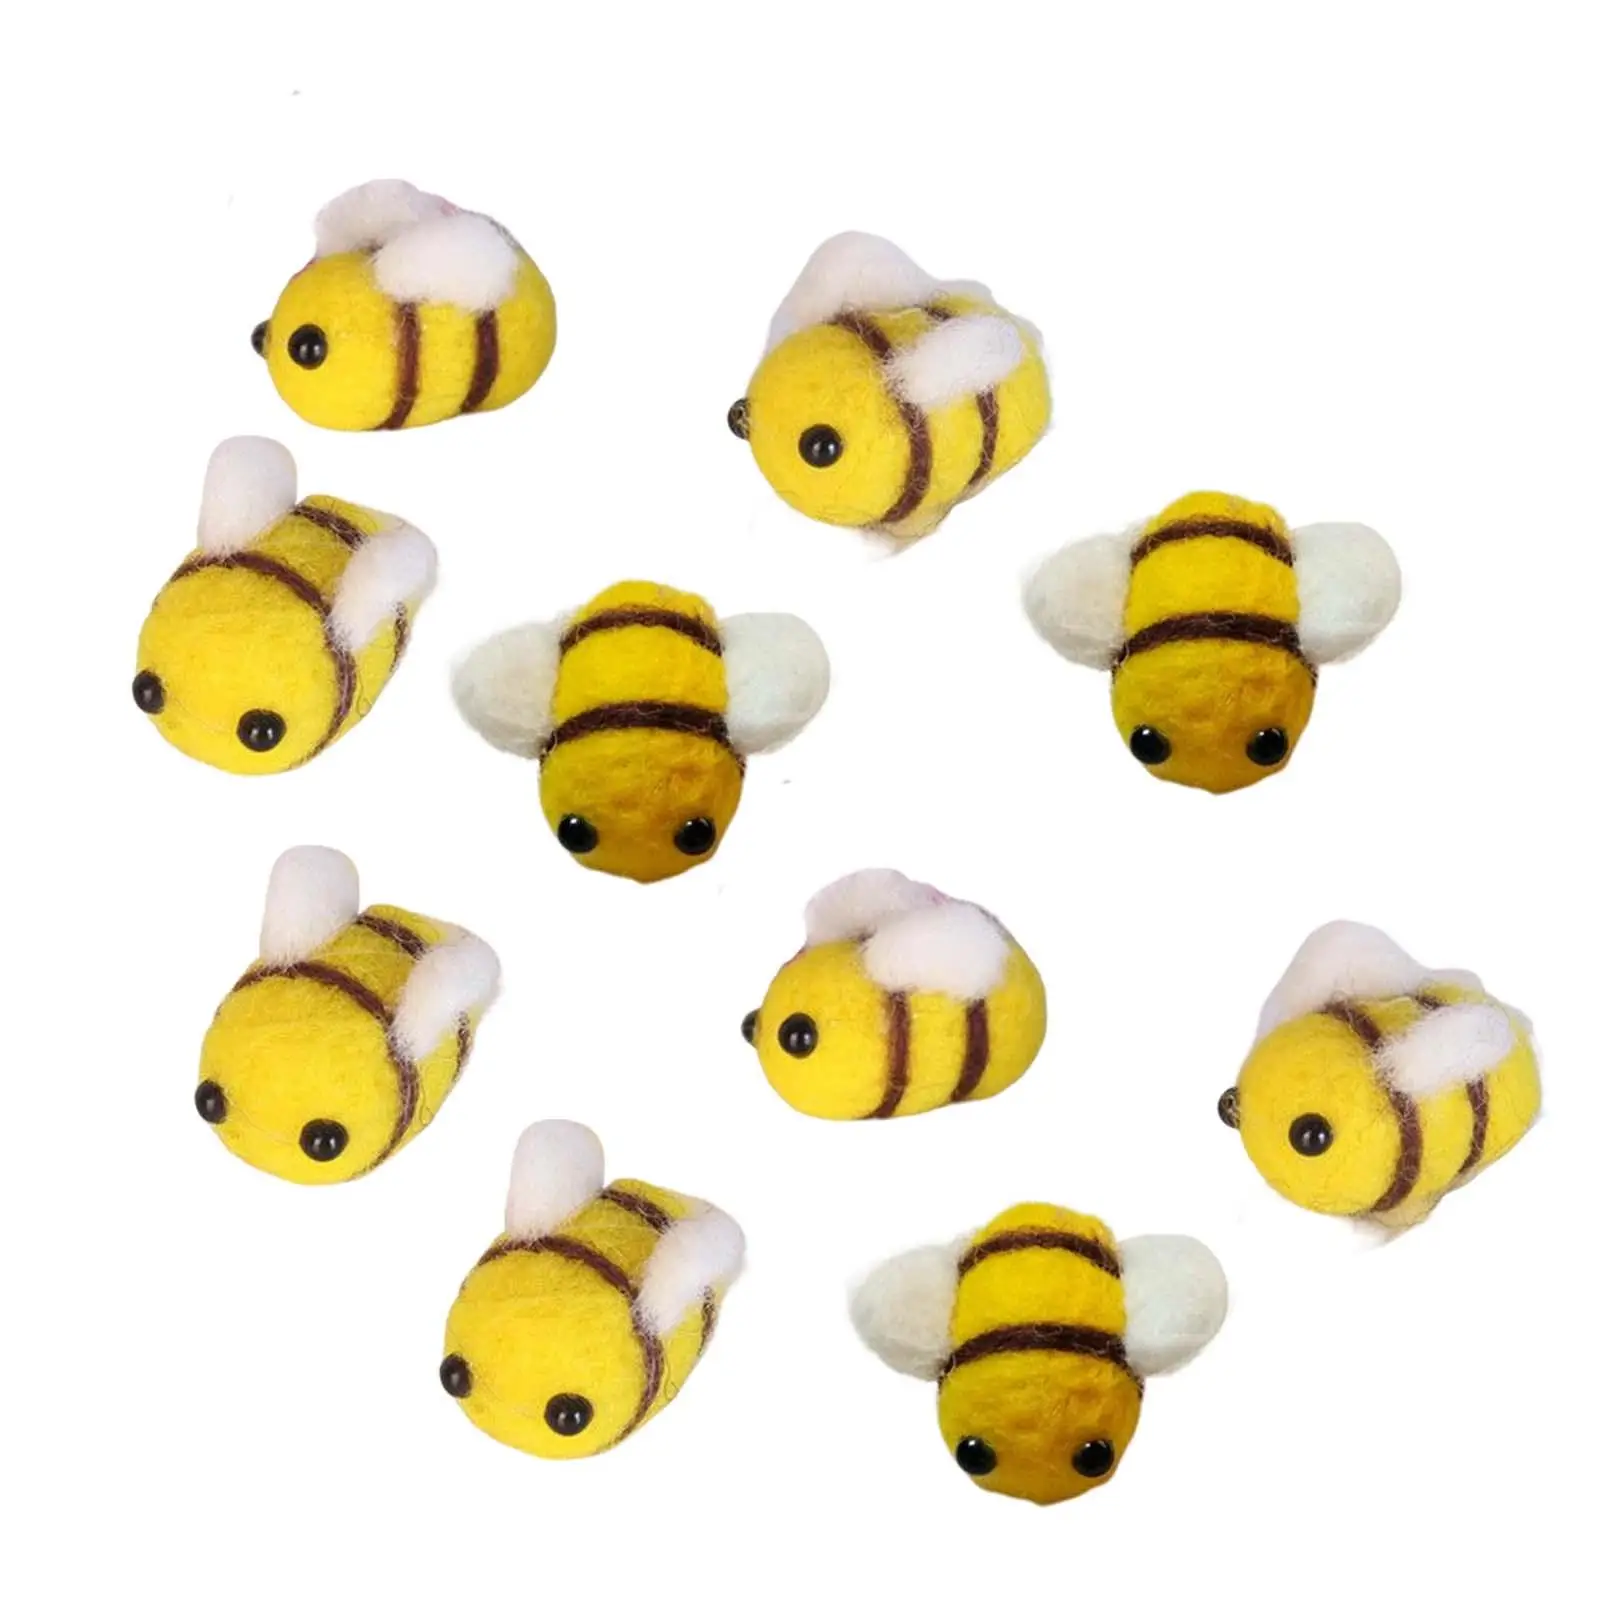 10 Pieces Bumble Bee Ornament Wool Felt bees for Hair Clips Party Christmas